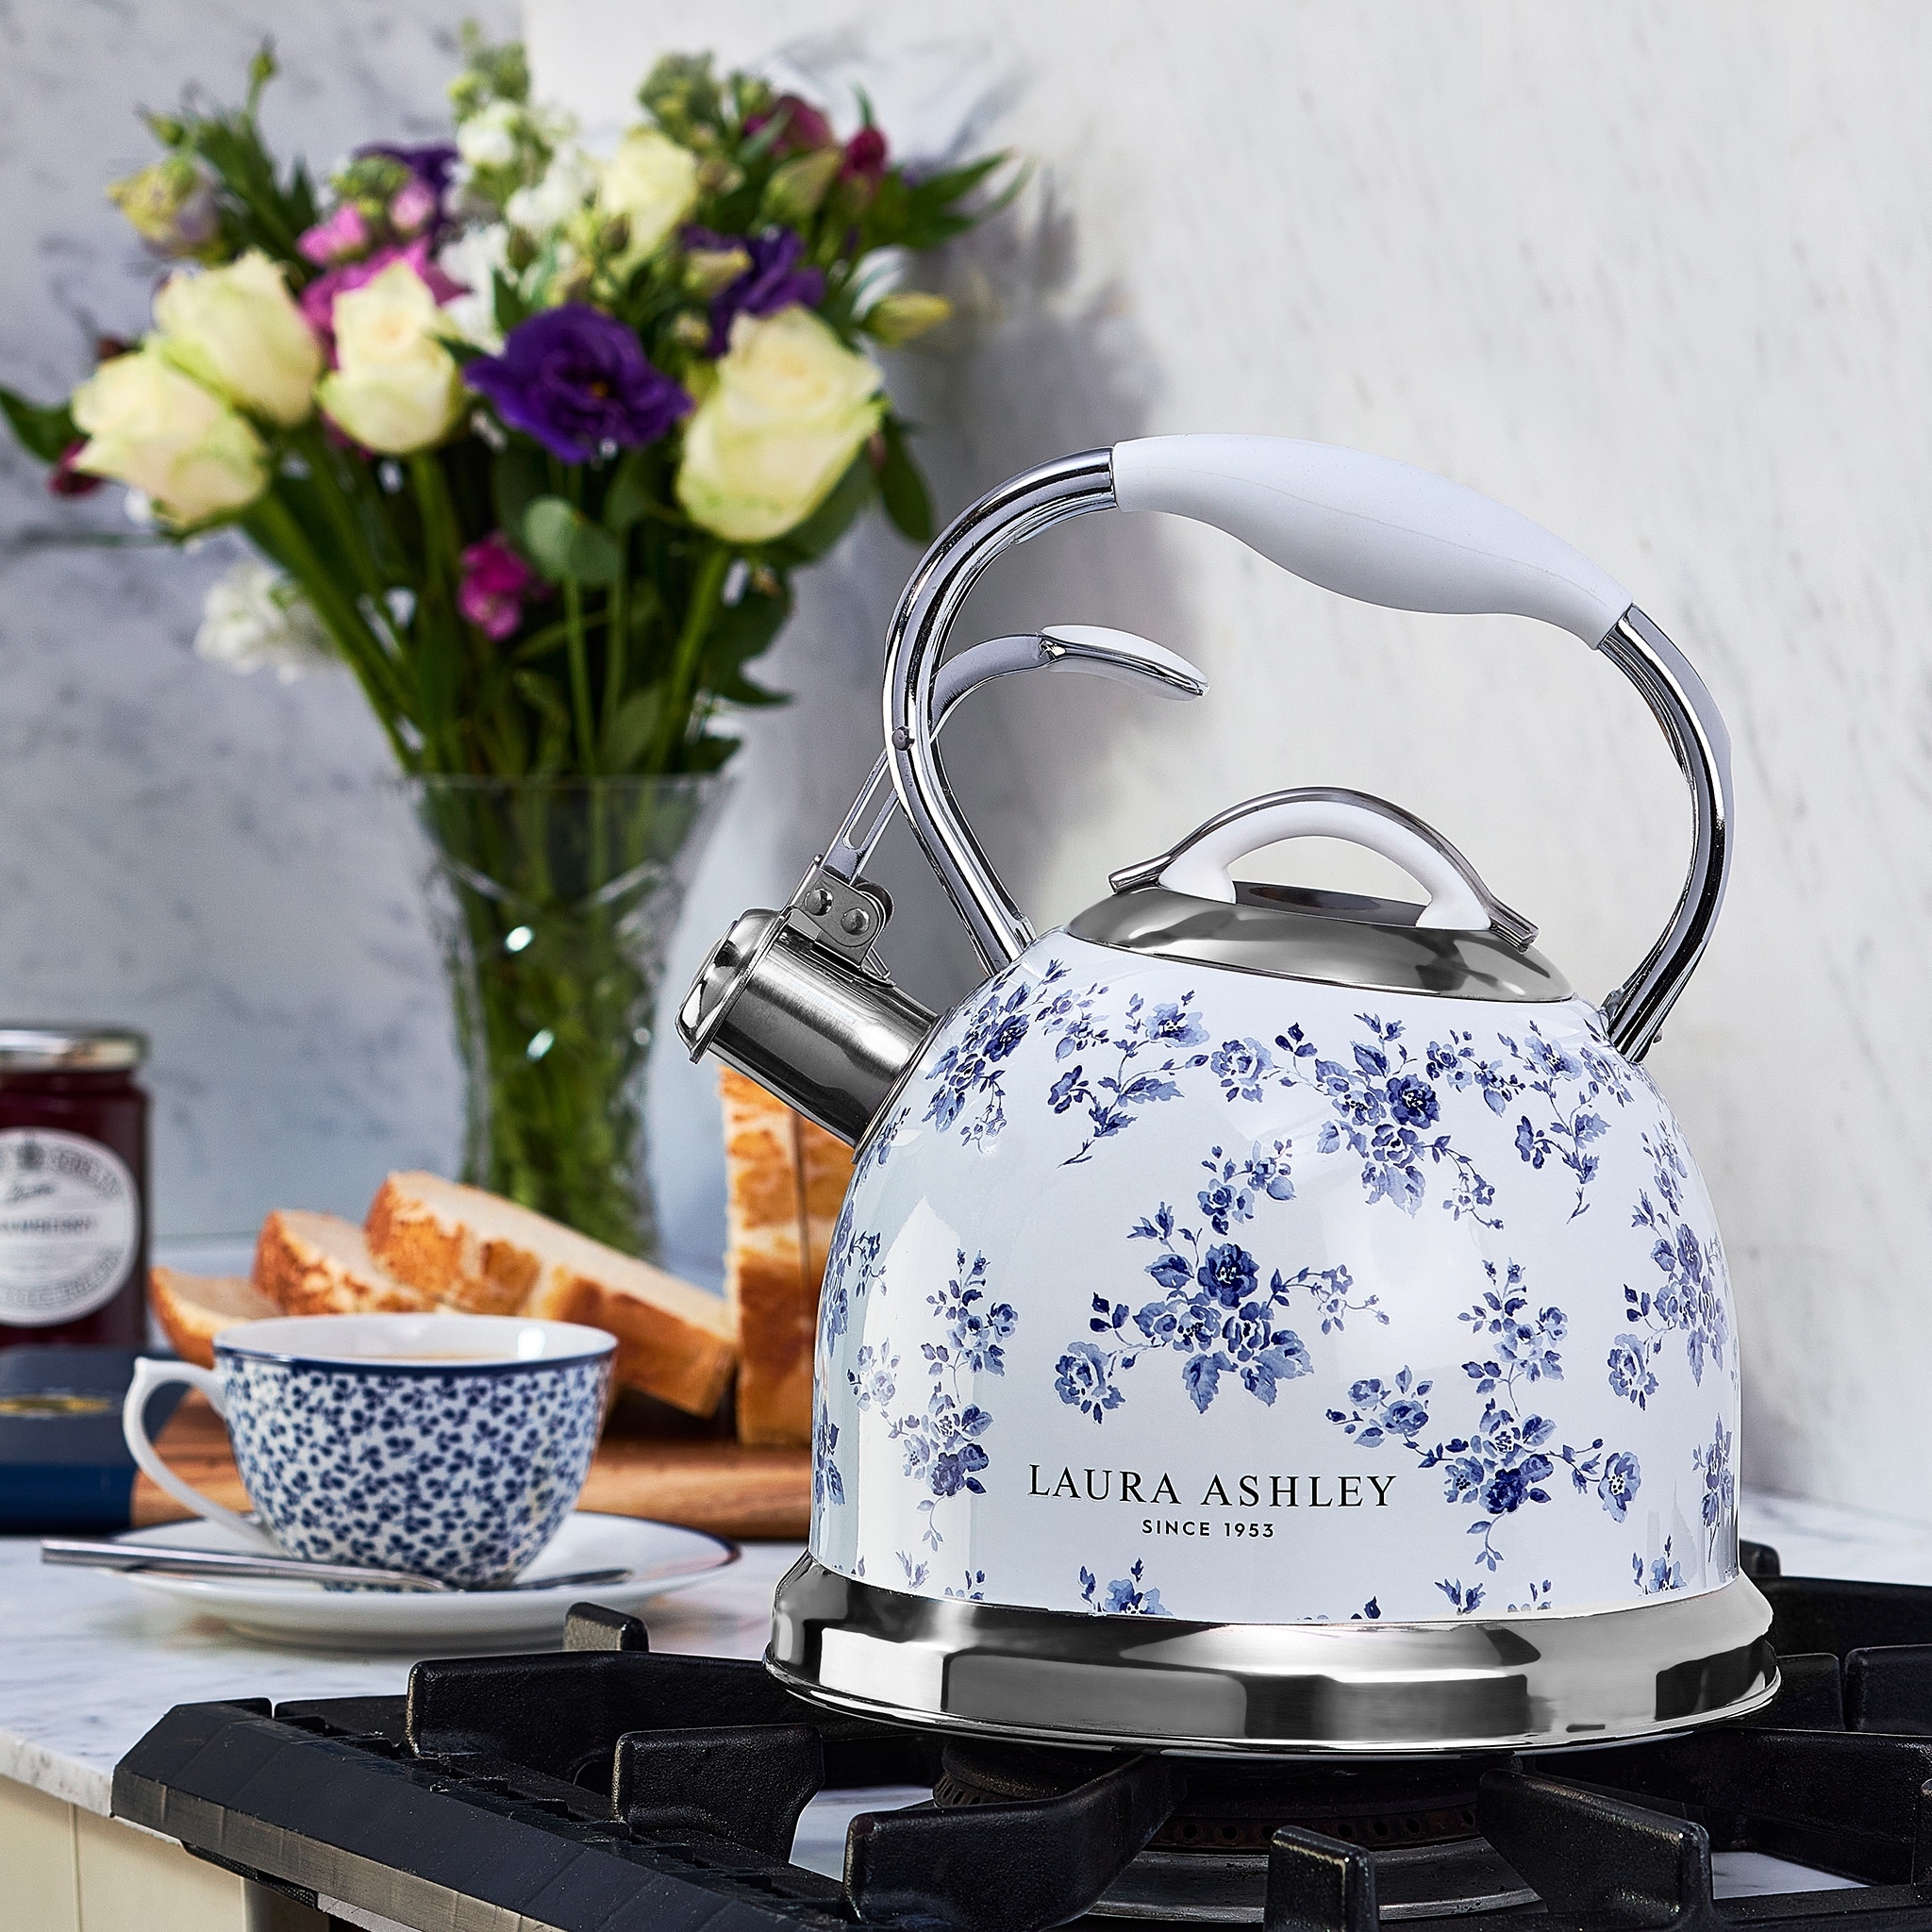 https://ak1.ostkcdn.com/images/products/is/images/direct/9d207e8434f19f9bfa5c5fc1ff835b53fc5f4b2d/VQ-Laura-Ashley-10-Cup-Stove-Top-Kettle.jpg